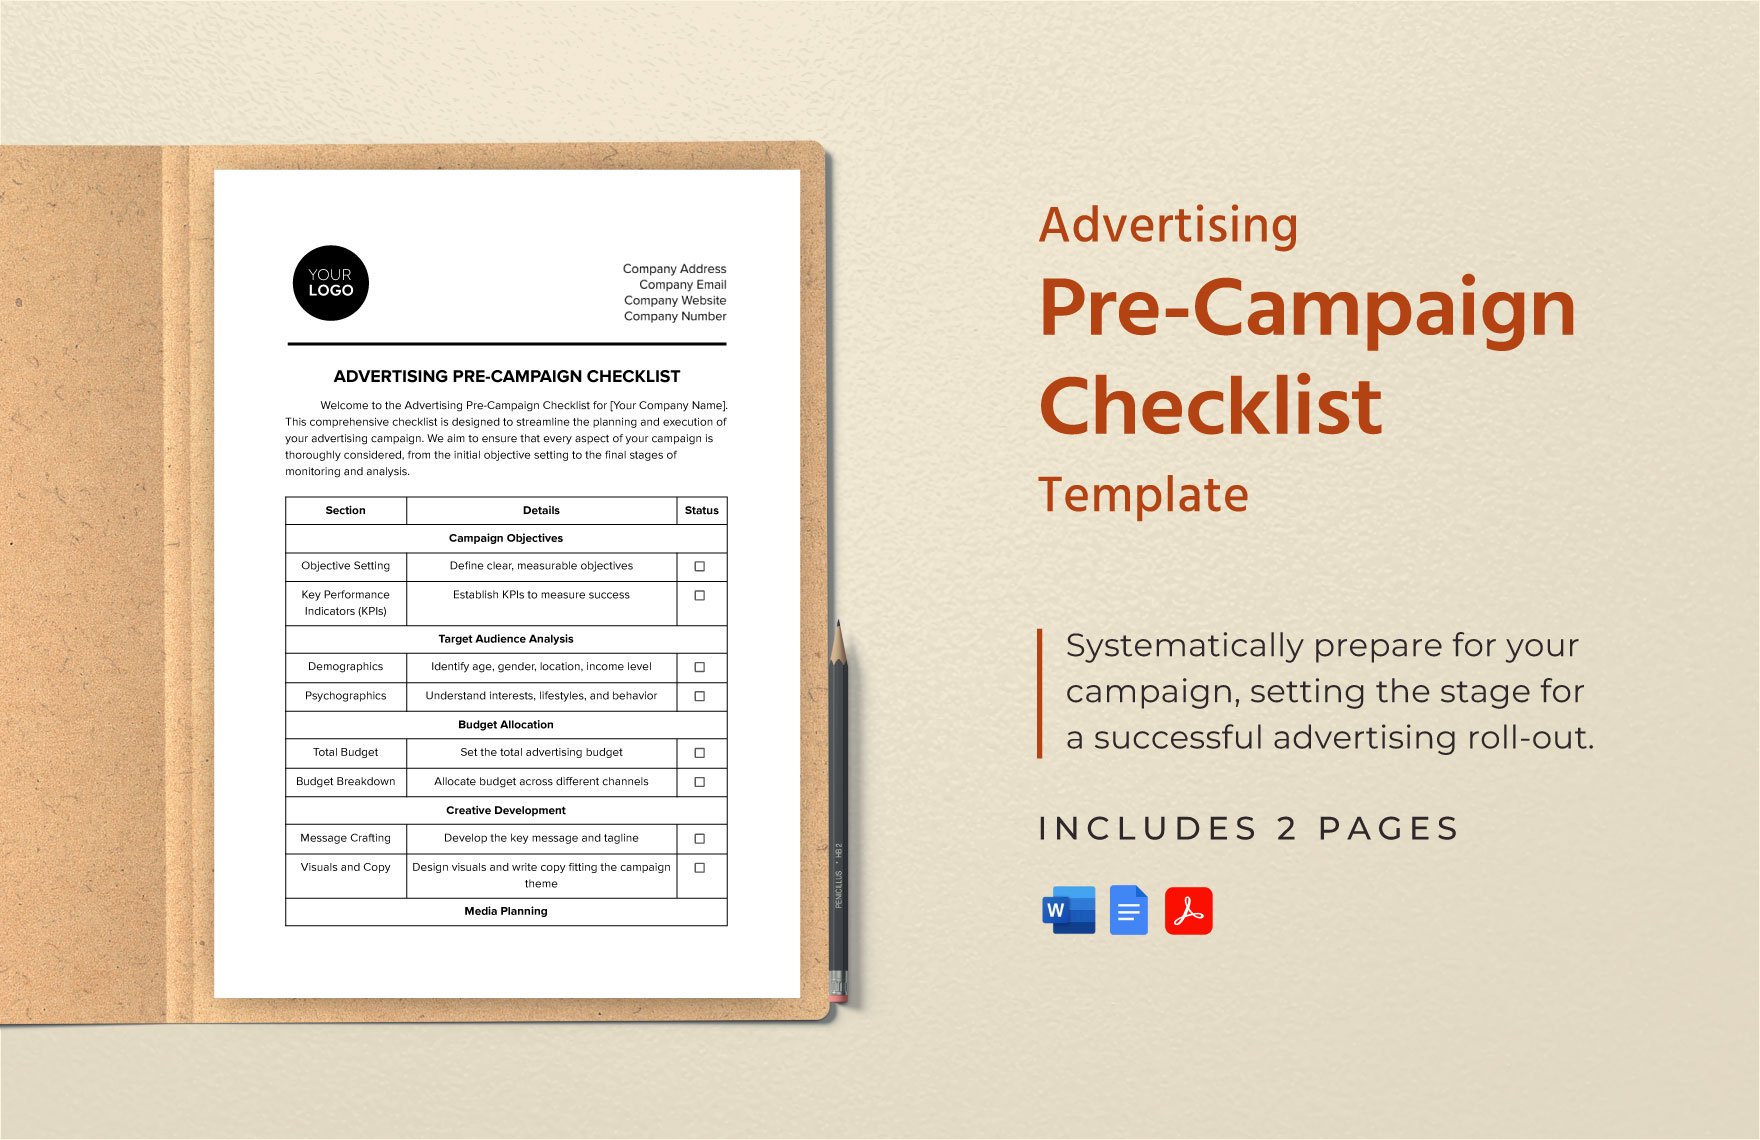 Advertising Pre-Campaign Checklist Template in Word, Google Docs, PDF